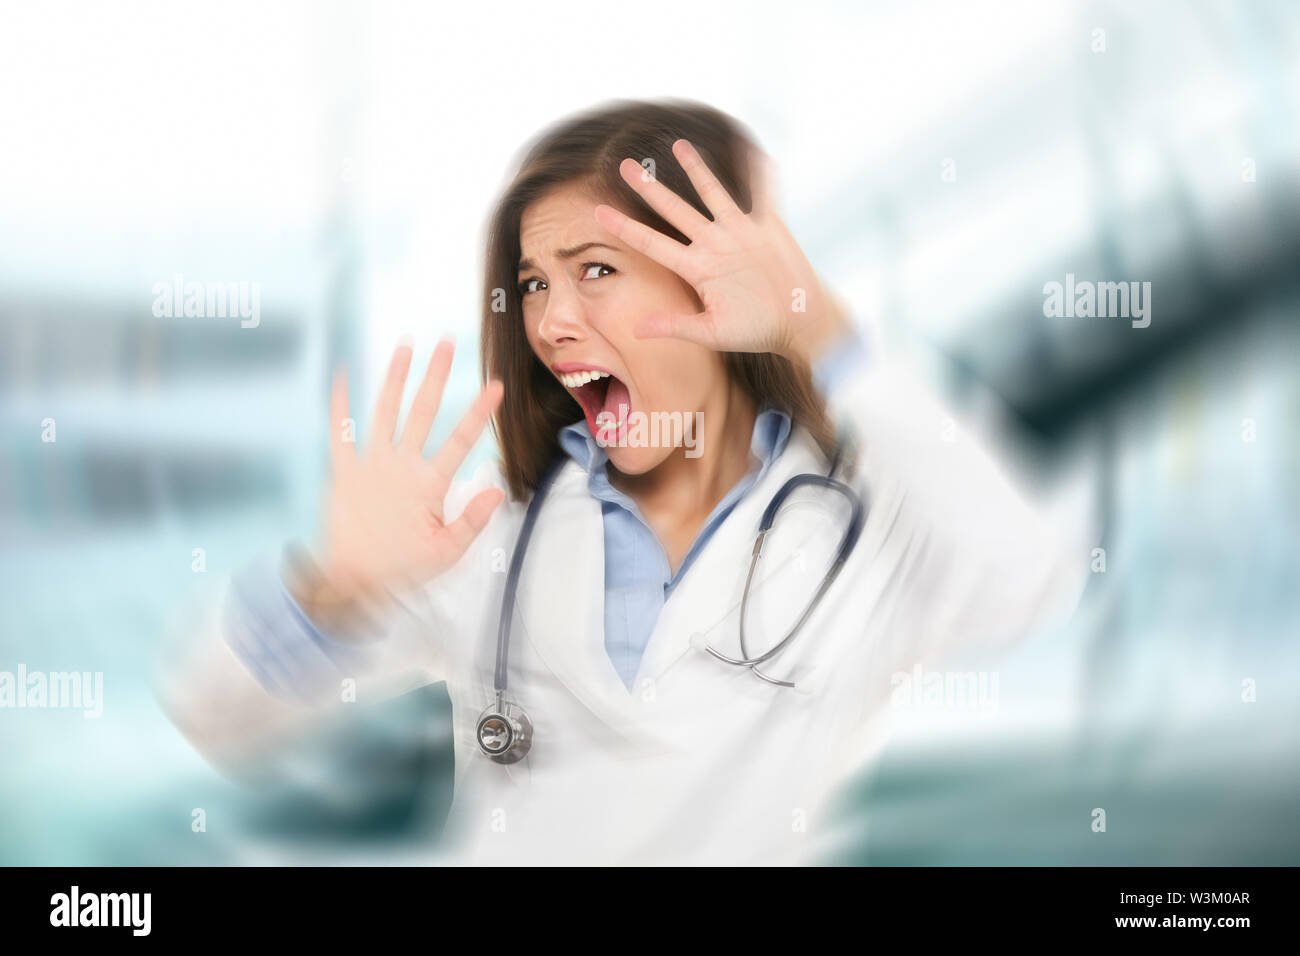 Surprised shocked scared doctor woman afraid and frightened covering her face with hands showing funny expression shocked and surprised. Female medical health care professional in hospital. Stock Photo